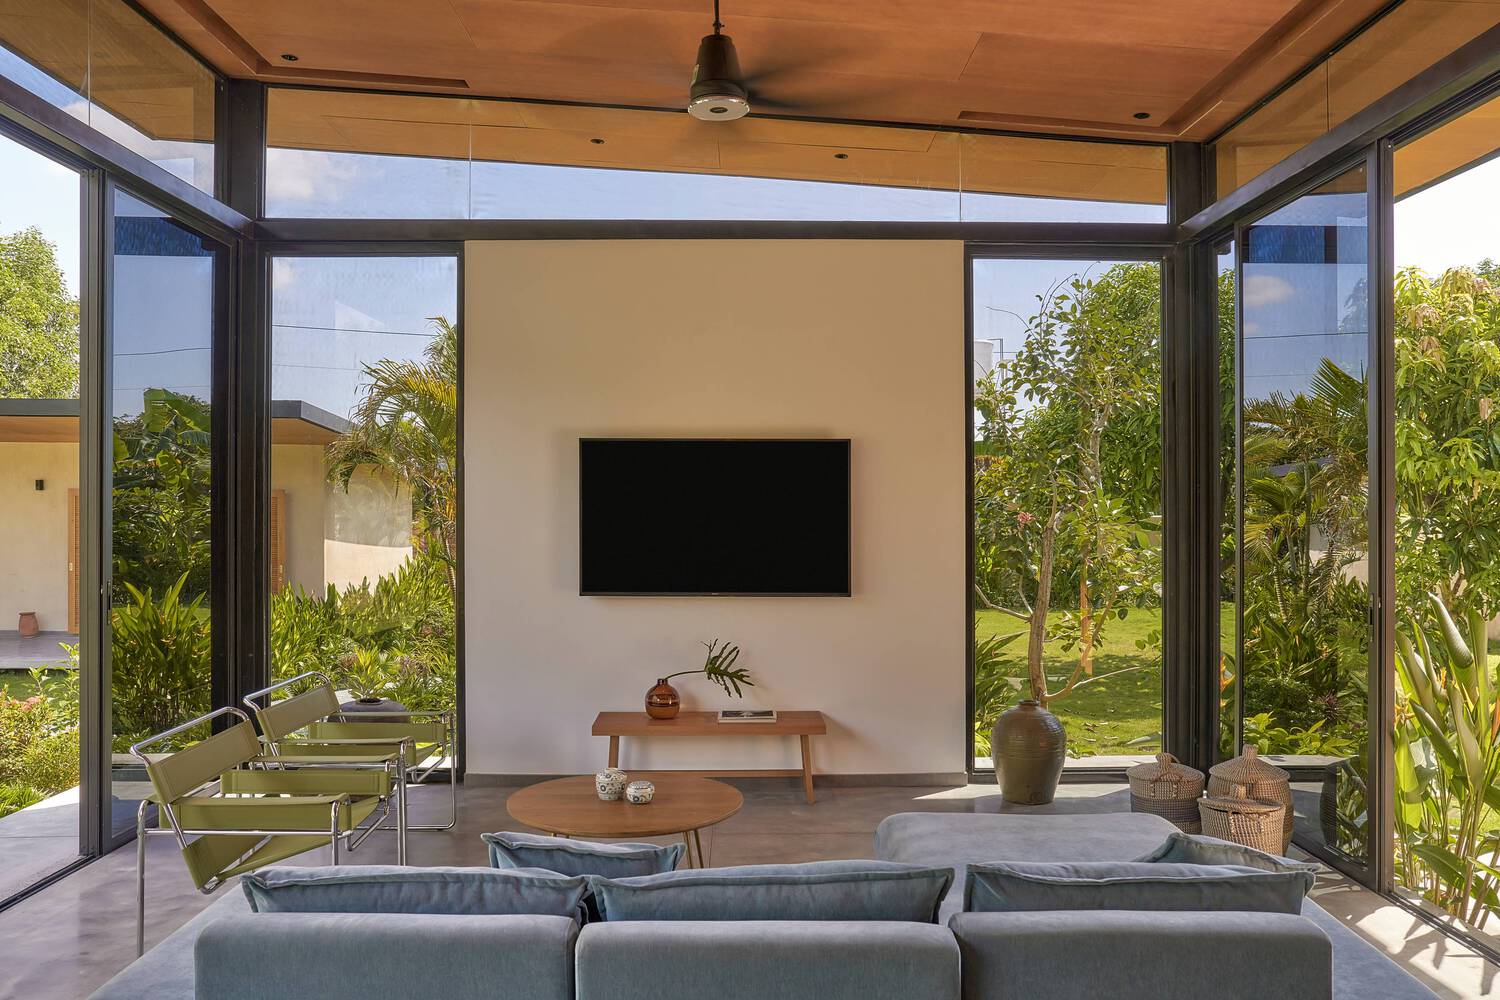 The living room of the Bioclimatic Tropical Villa. Photo by Phu Dao.